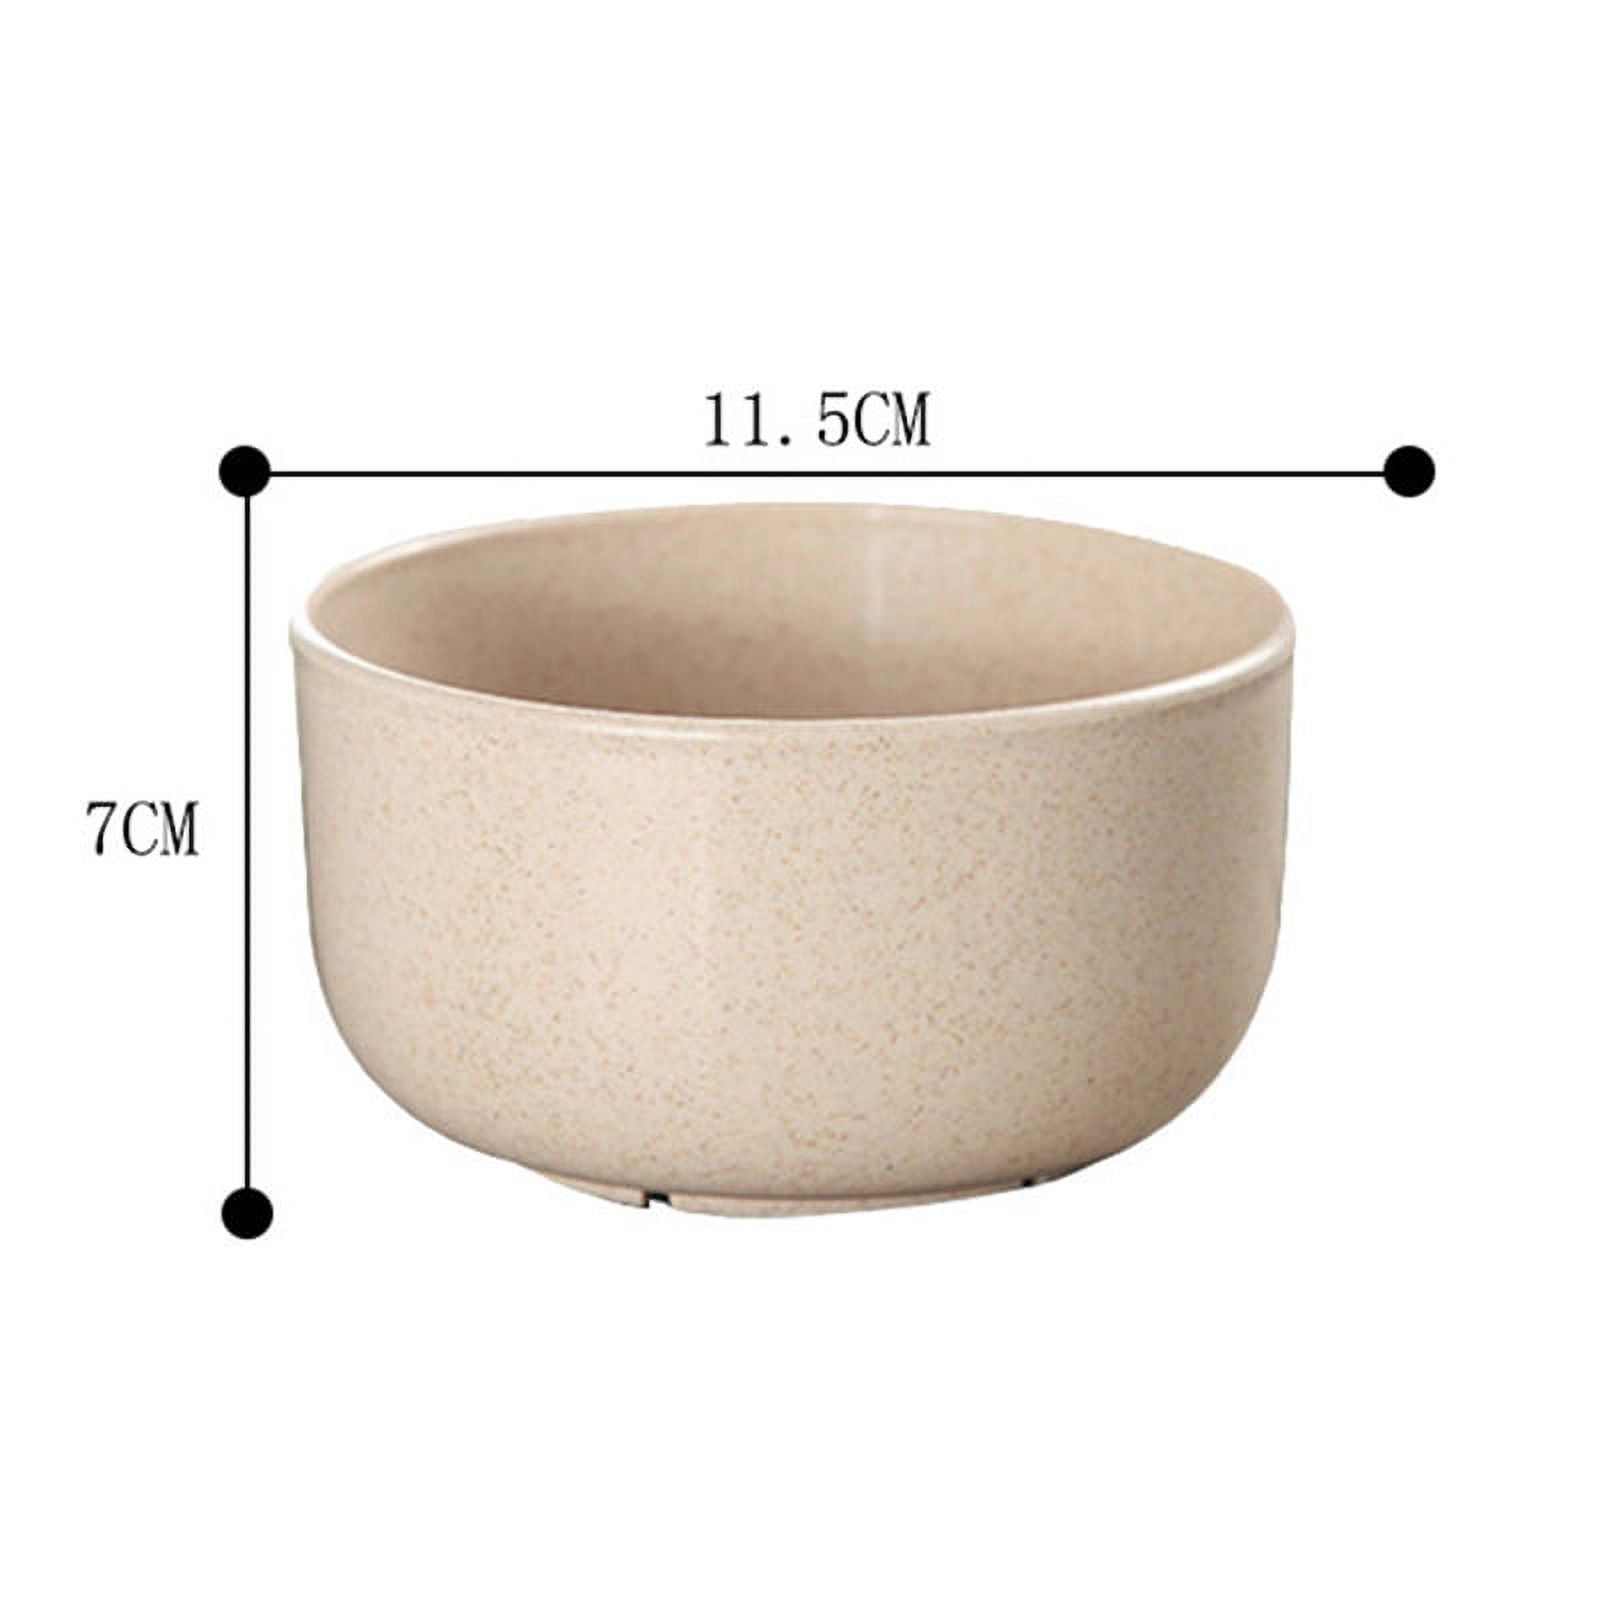 SIHKO Wheat Straw Cereal Bowls with Lids, Microwavable Bowls with Lids,  Storage and Serving Bowls with Lids, Small Mixing Bowls for Kitchen, Salad  and